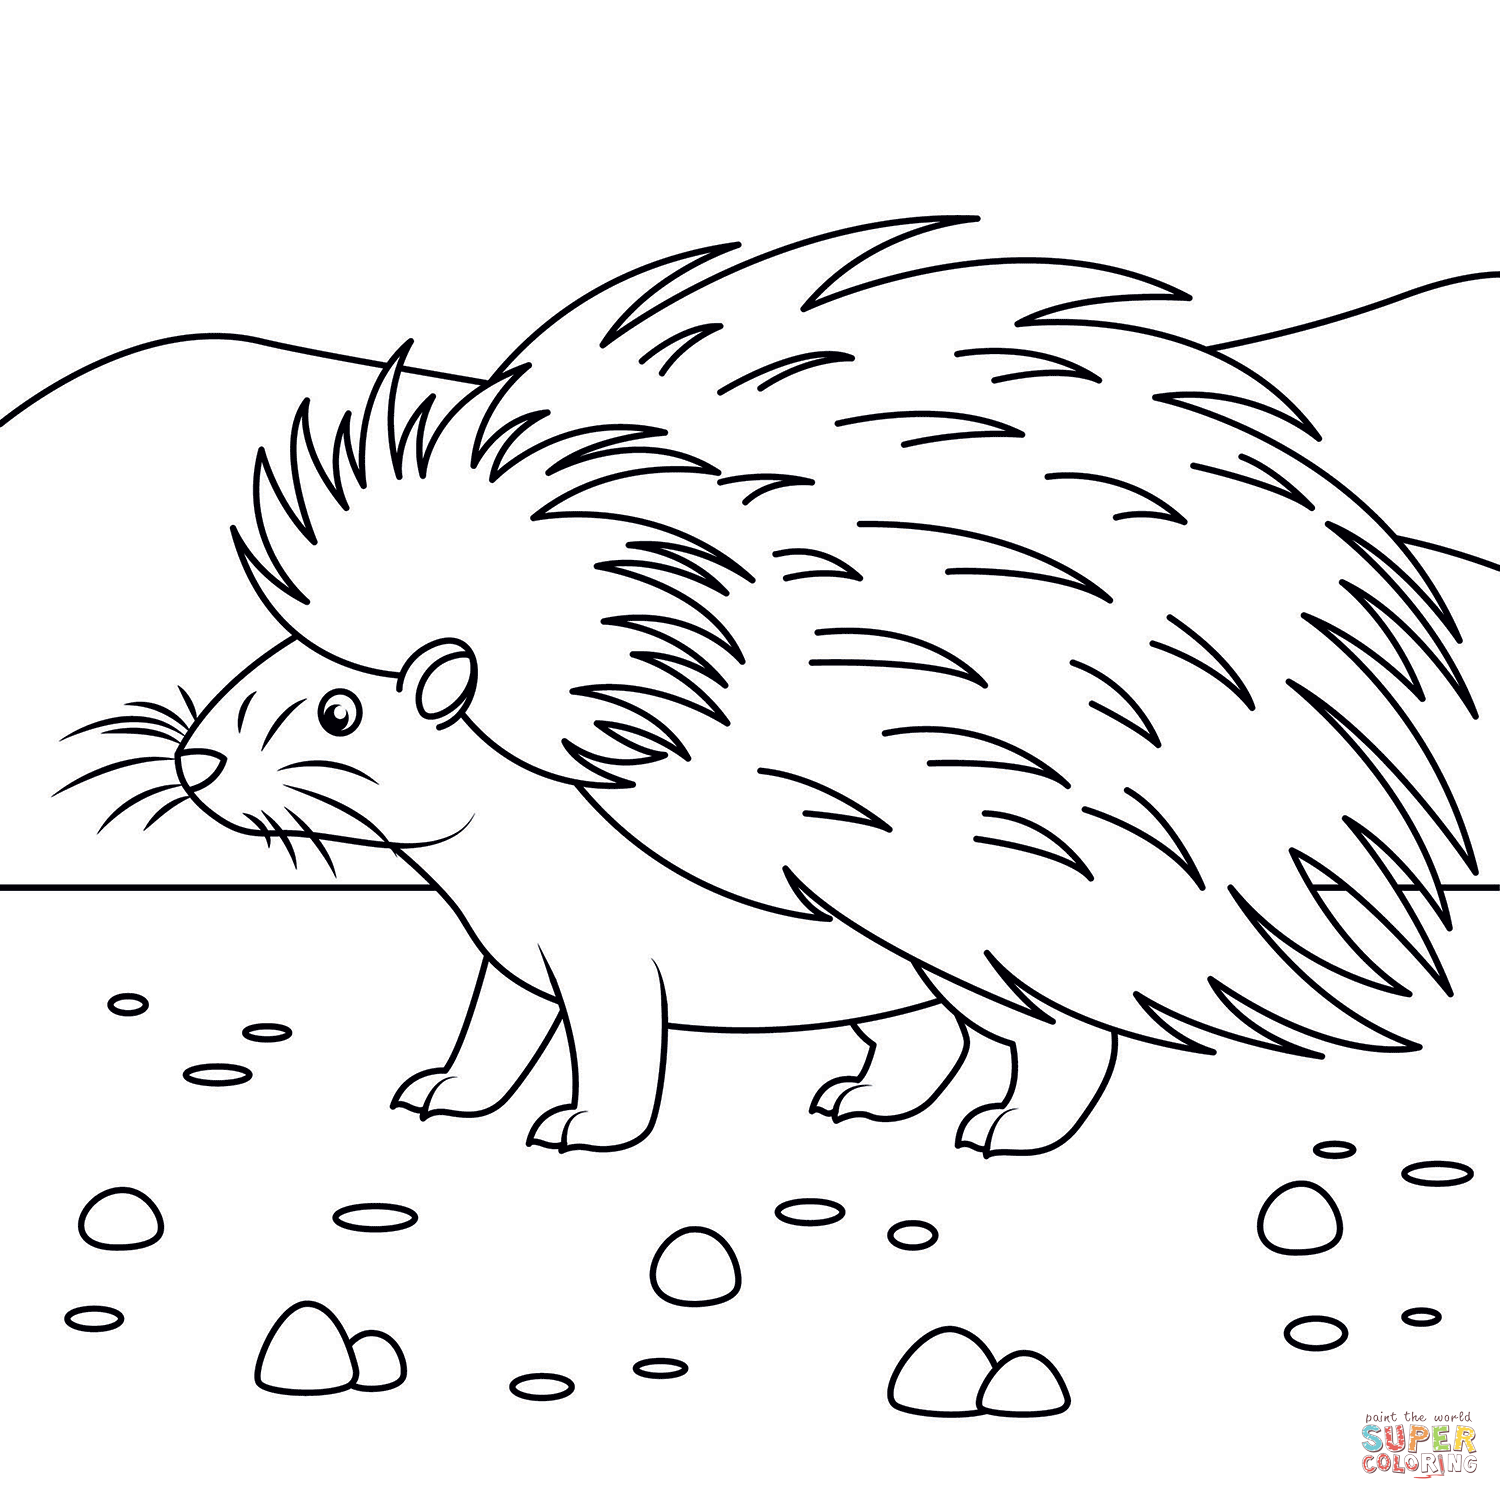 Cute porcupine coloring page free printable coloring pages